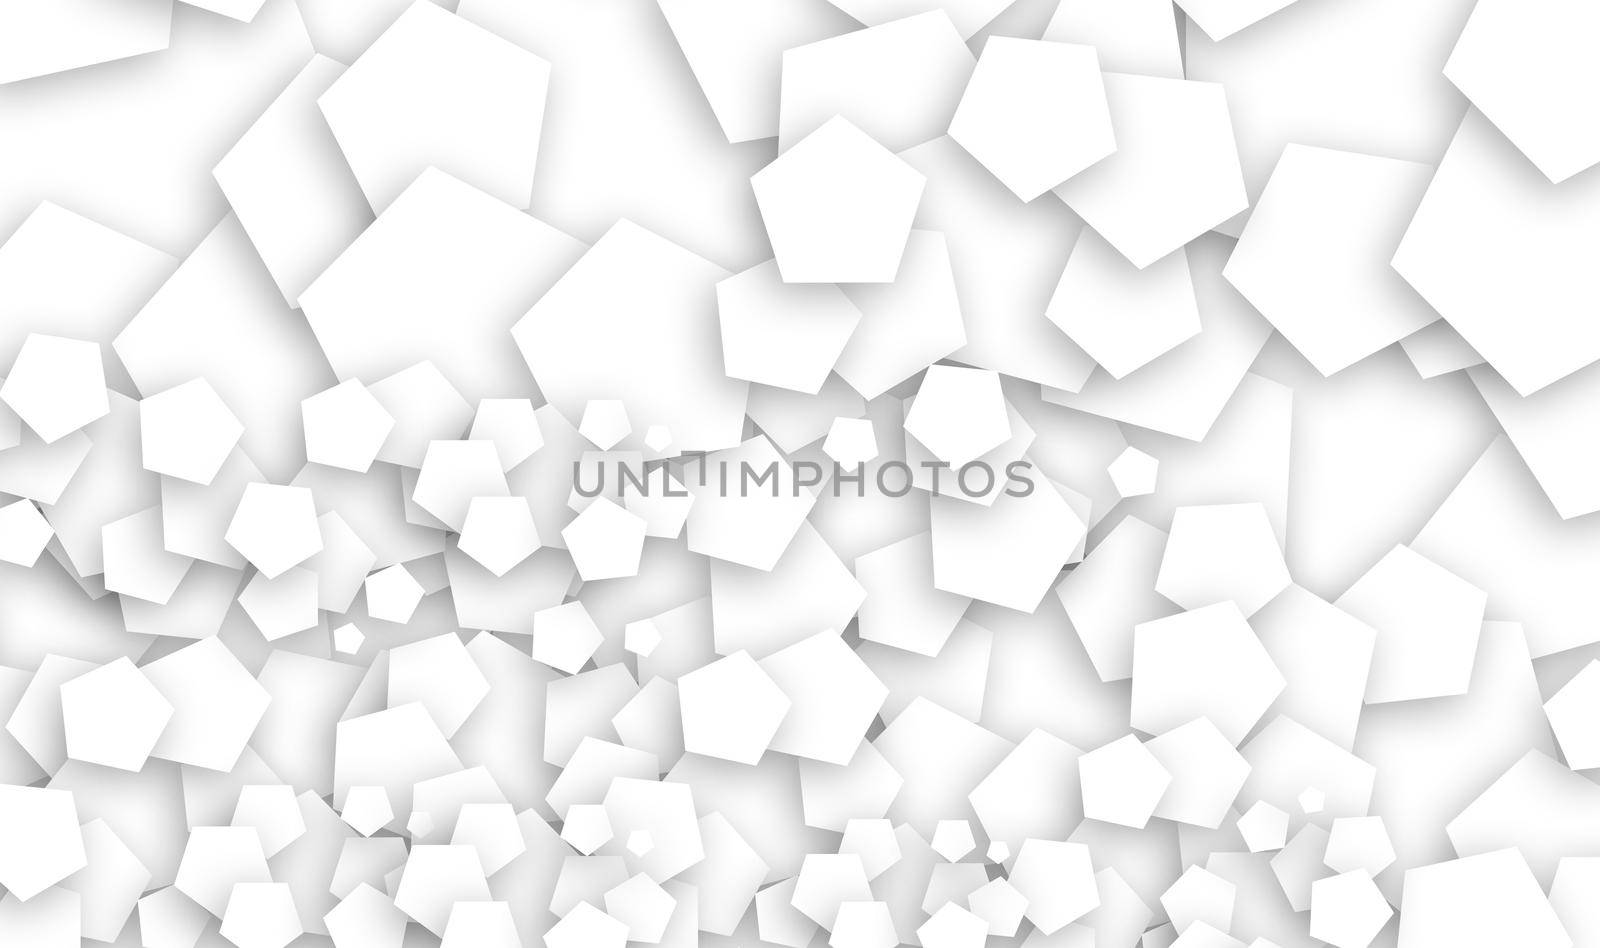 abstract concept design made of pentagon creating the fractal design, created by overlapping on each other with soft shadow, a large group of shapes, layered image ready to print for cards, invitation, design print